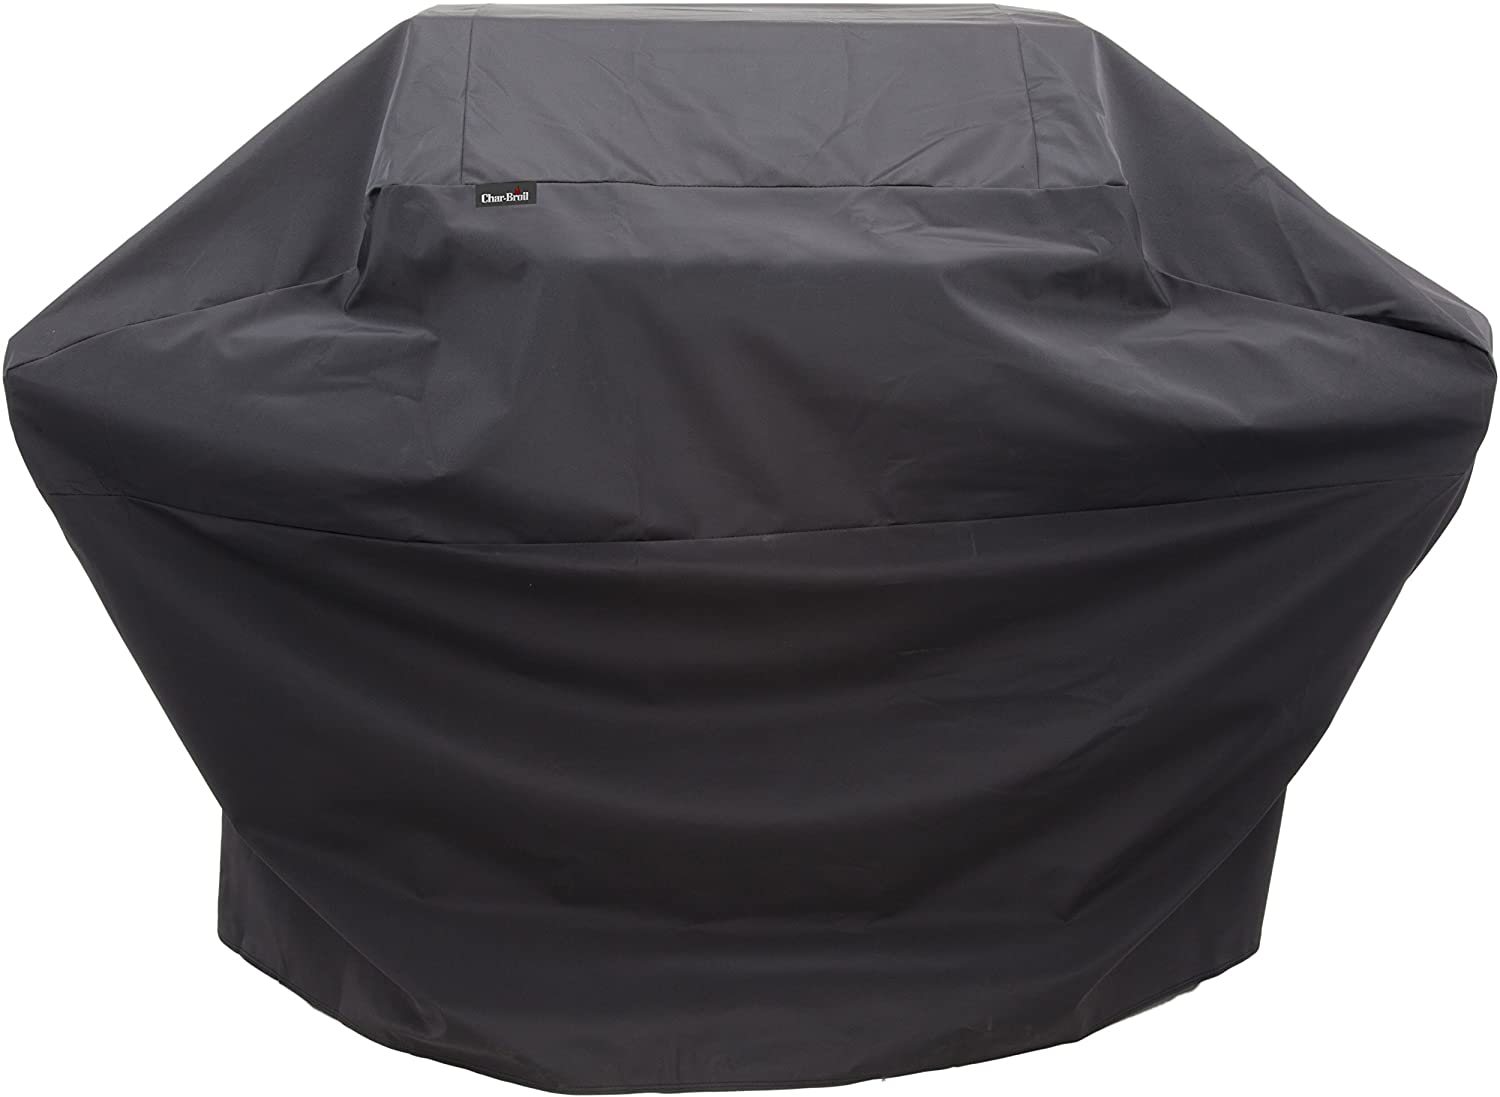 Char Broil Performance Extra Large Grill Cover $16 + Free Shipping w/ Prime or $25+